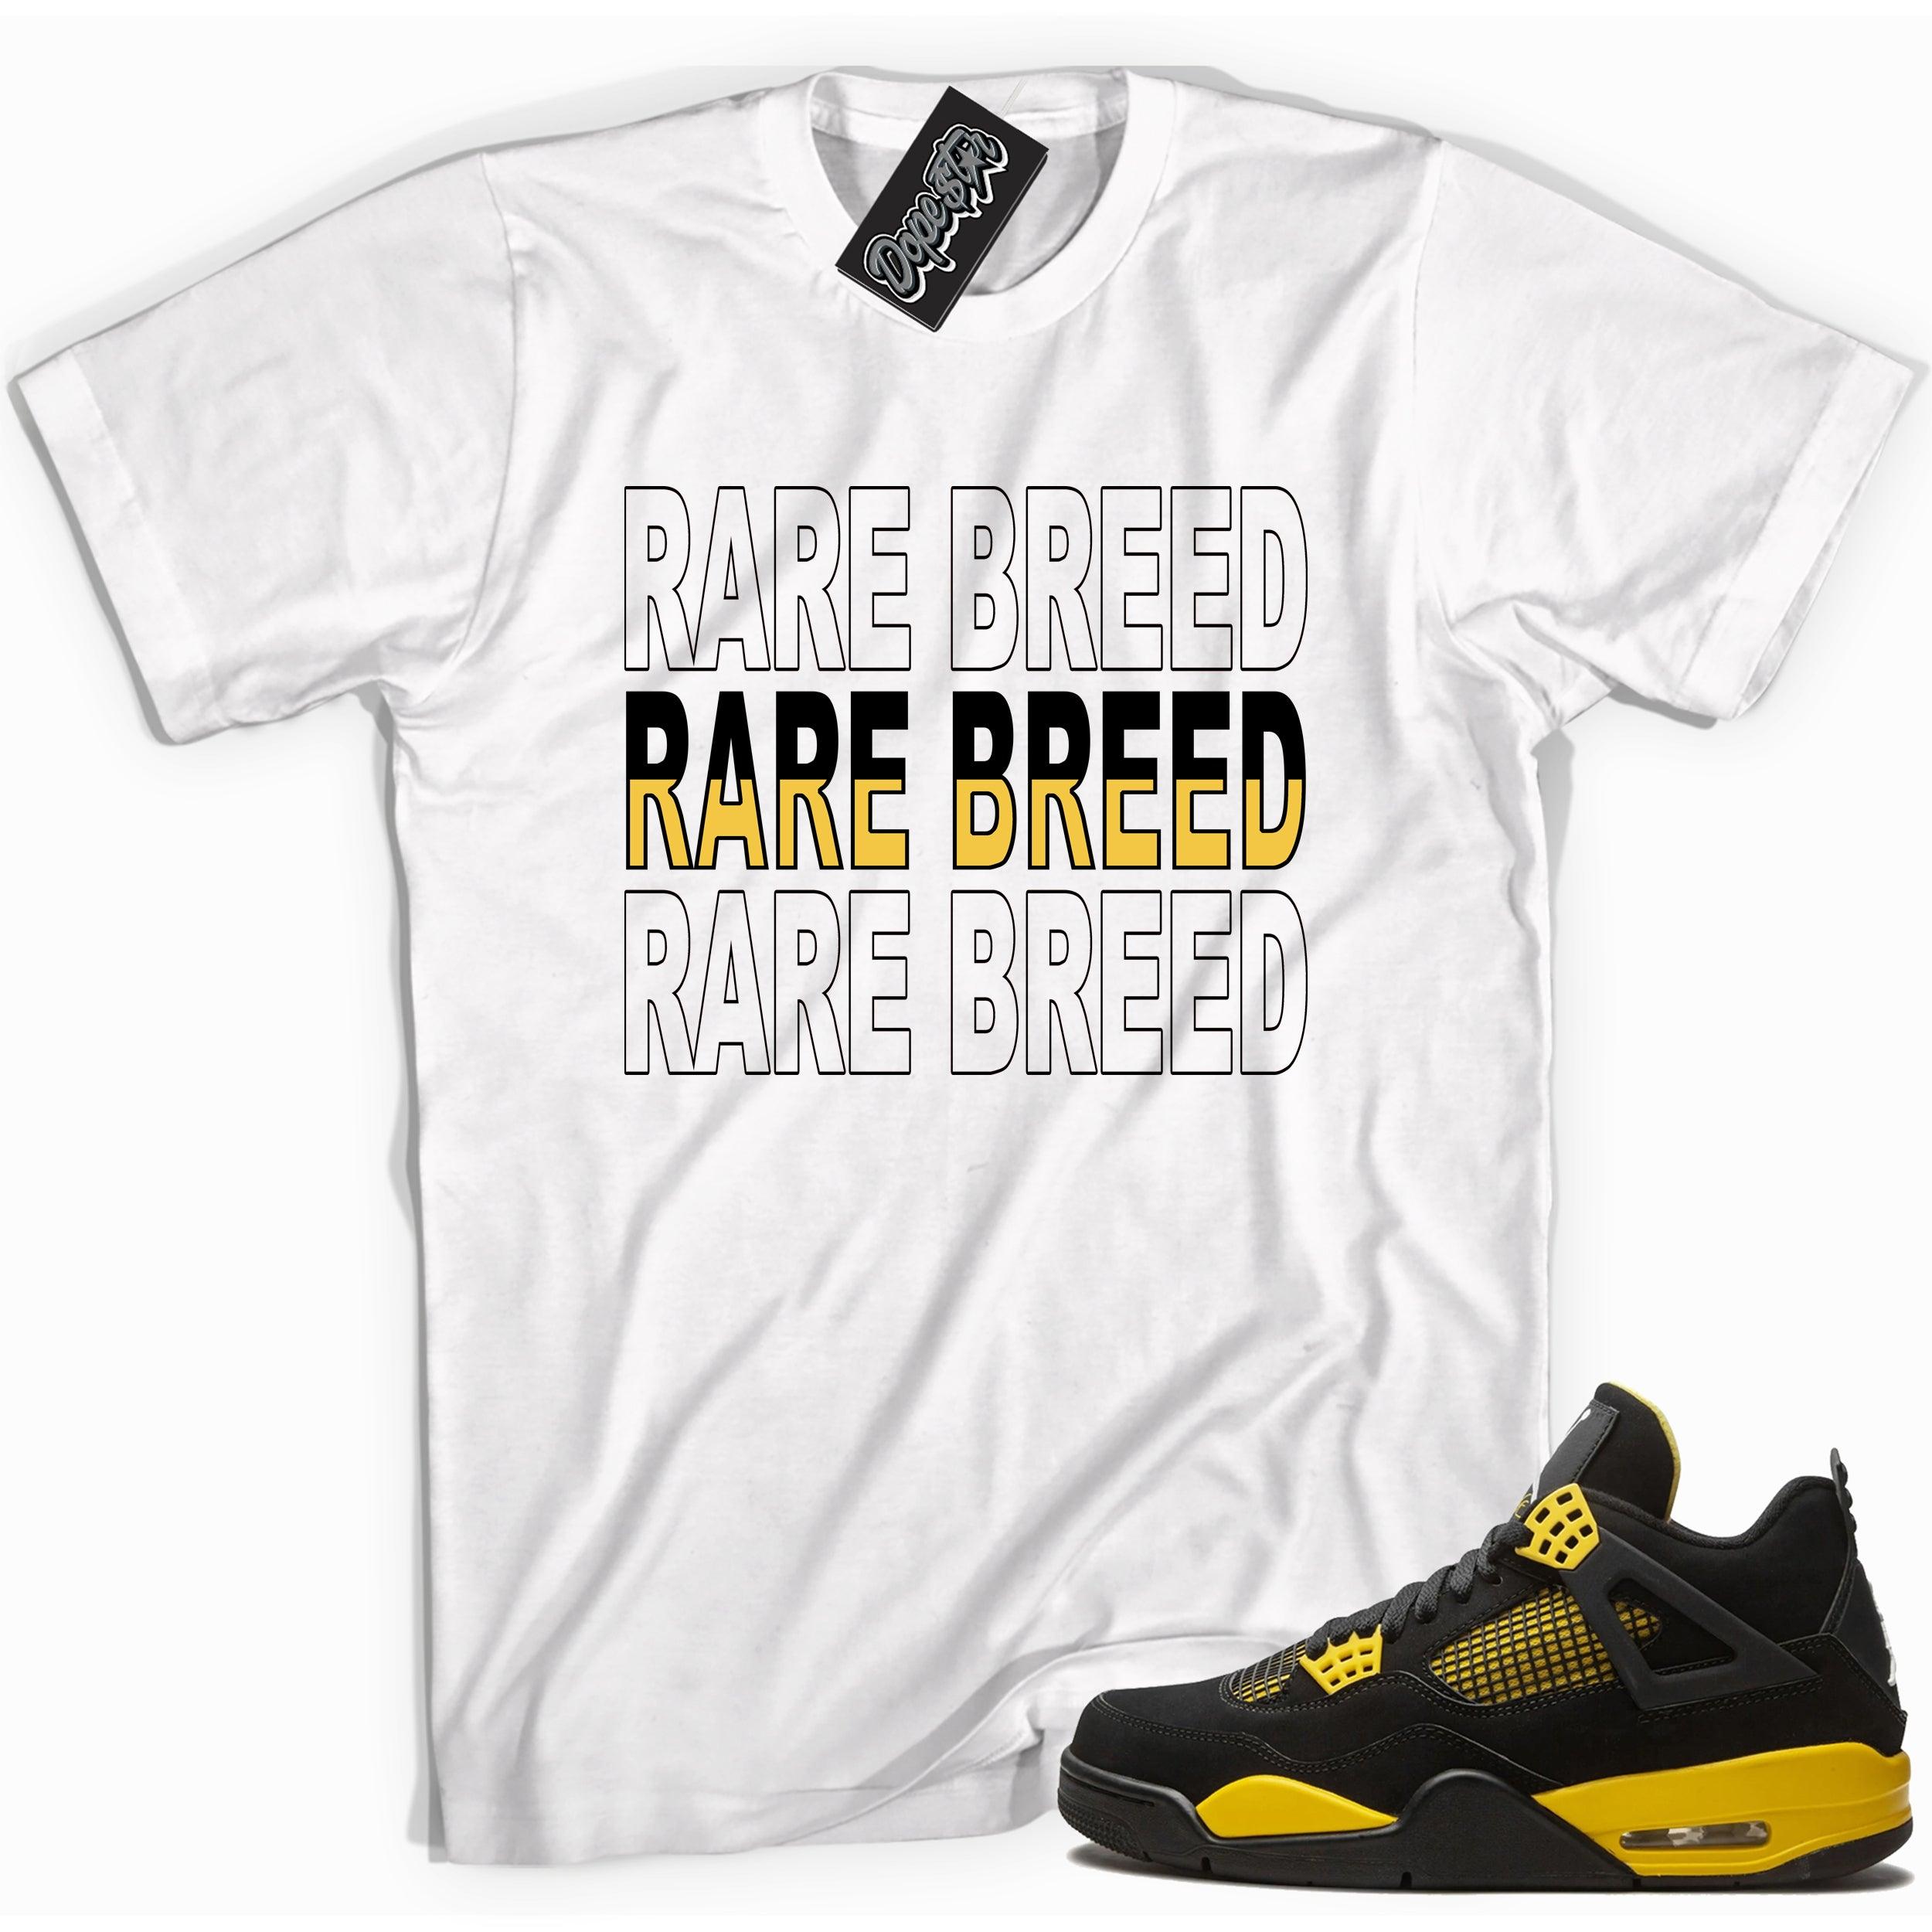 Cool white graphic tee with 'rare breed' print, that perfectly matches Air Jordan 4 Thunder sneakers